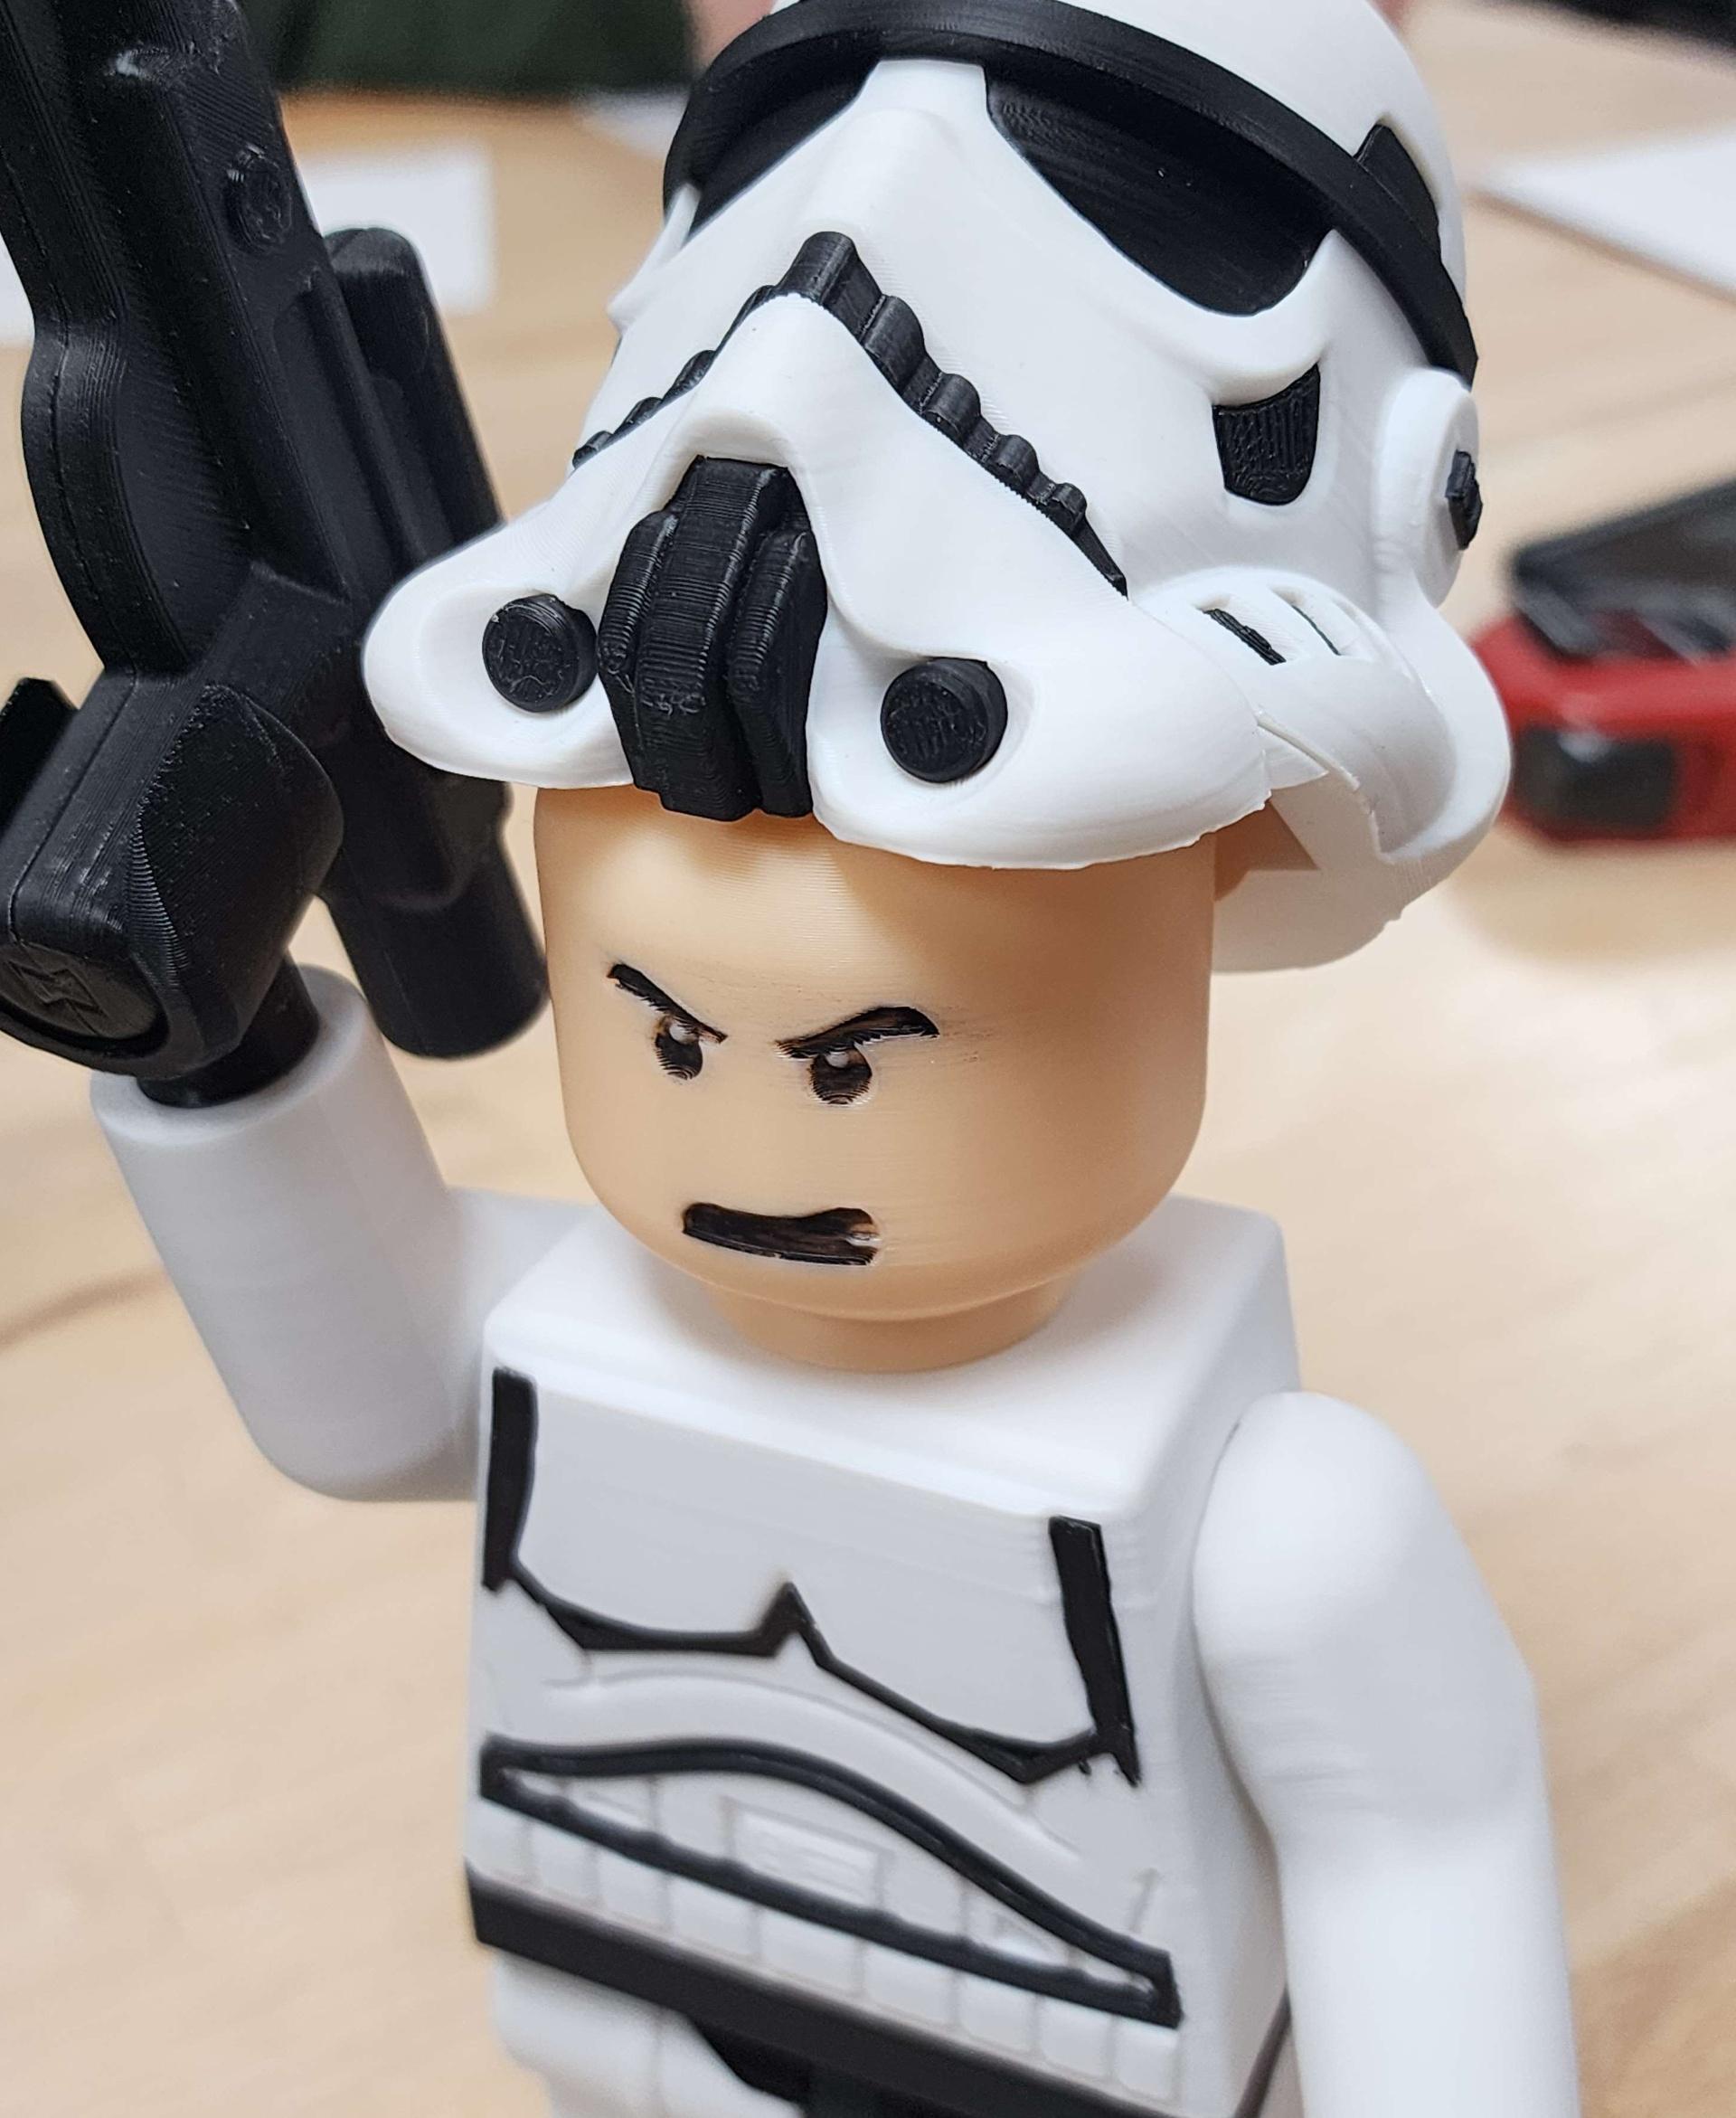 Stormtrooper (6:1 LEGO-inspired brick figure, NO MMU/AMS, NO supports, NO glue) - Gear up, troopers! - 3d model